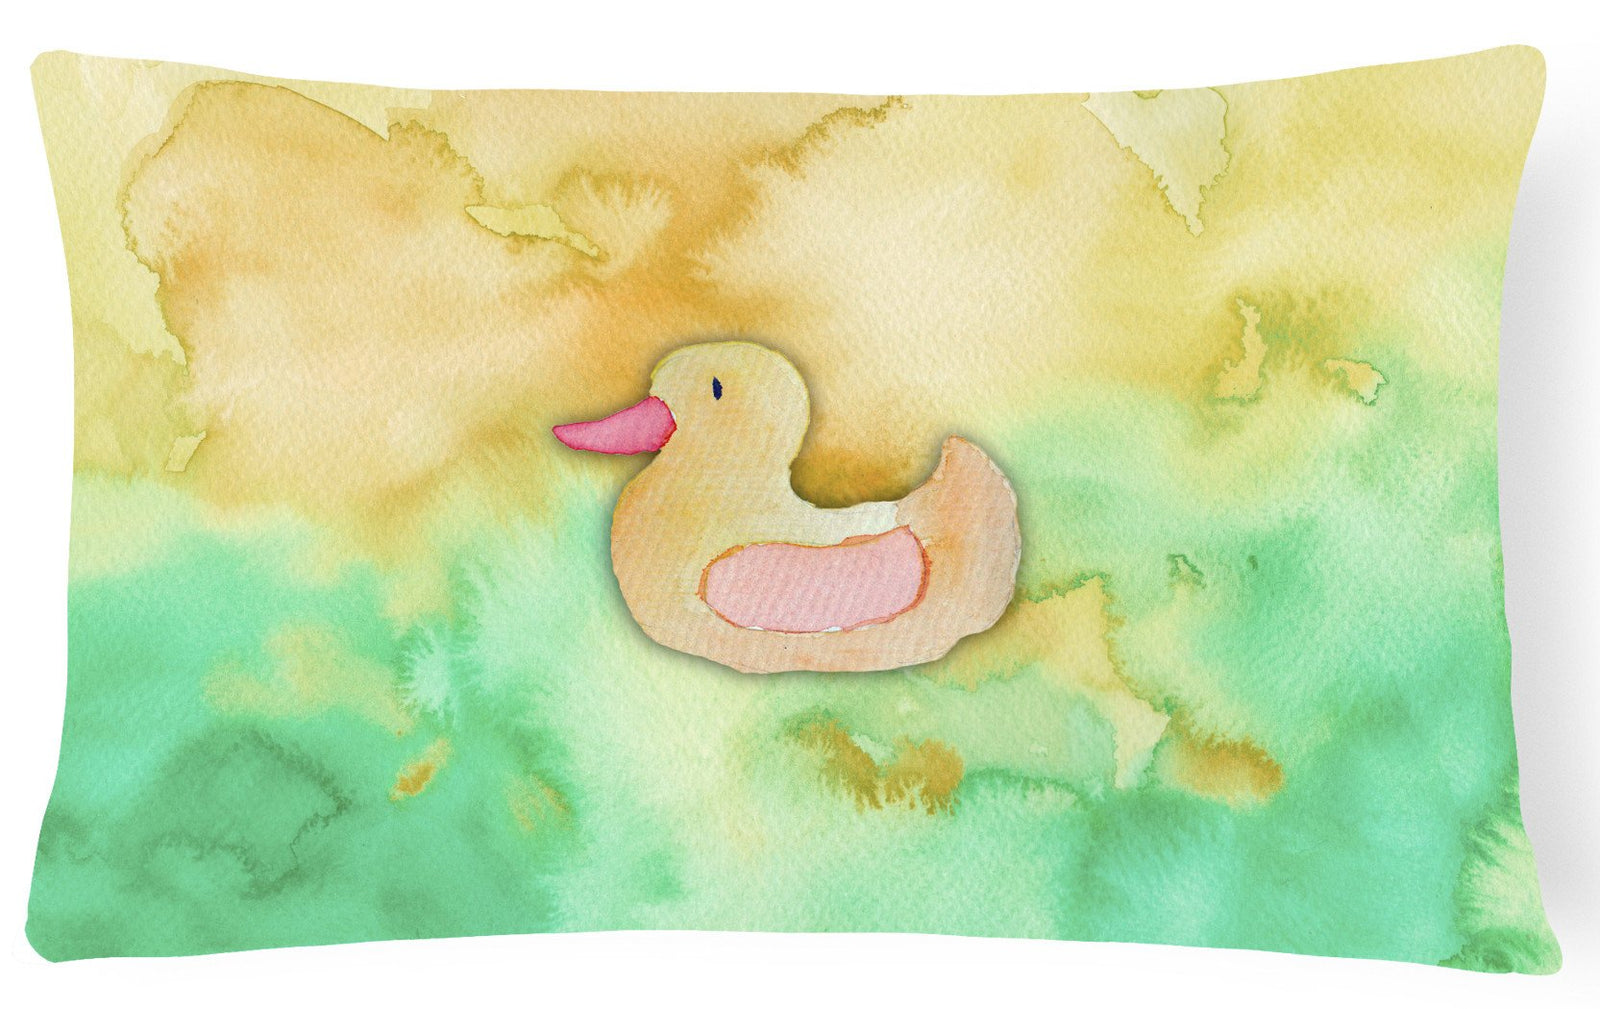 Rubber Duckie Watercolor Canvas Fabric Decorative Pillow BB7351PW1216 by Caroline's Treasures